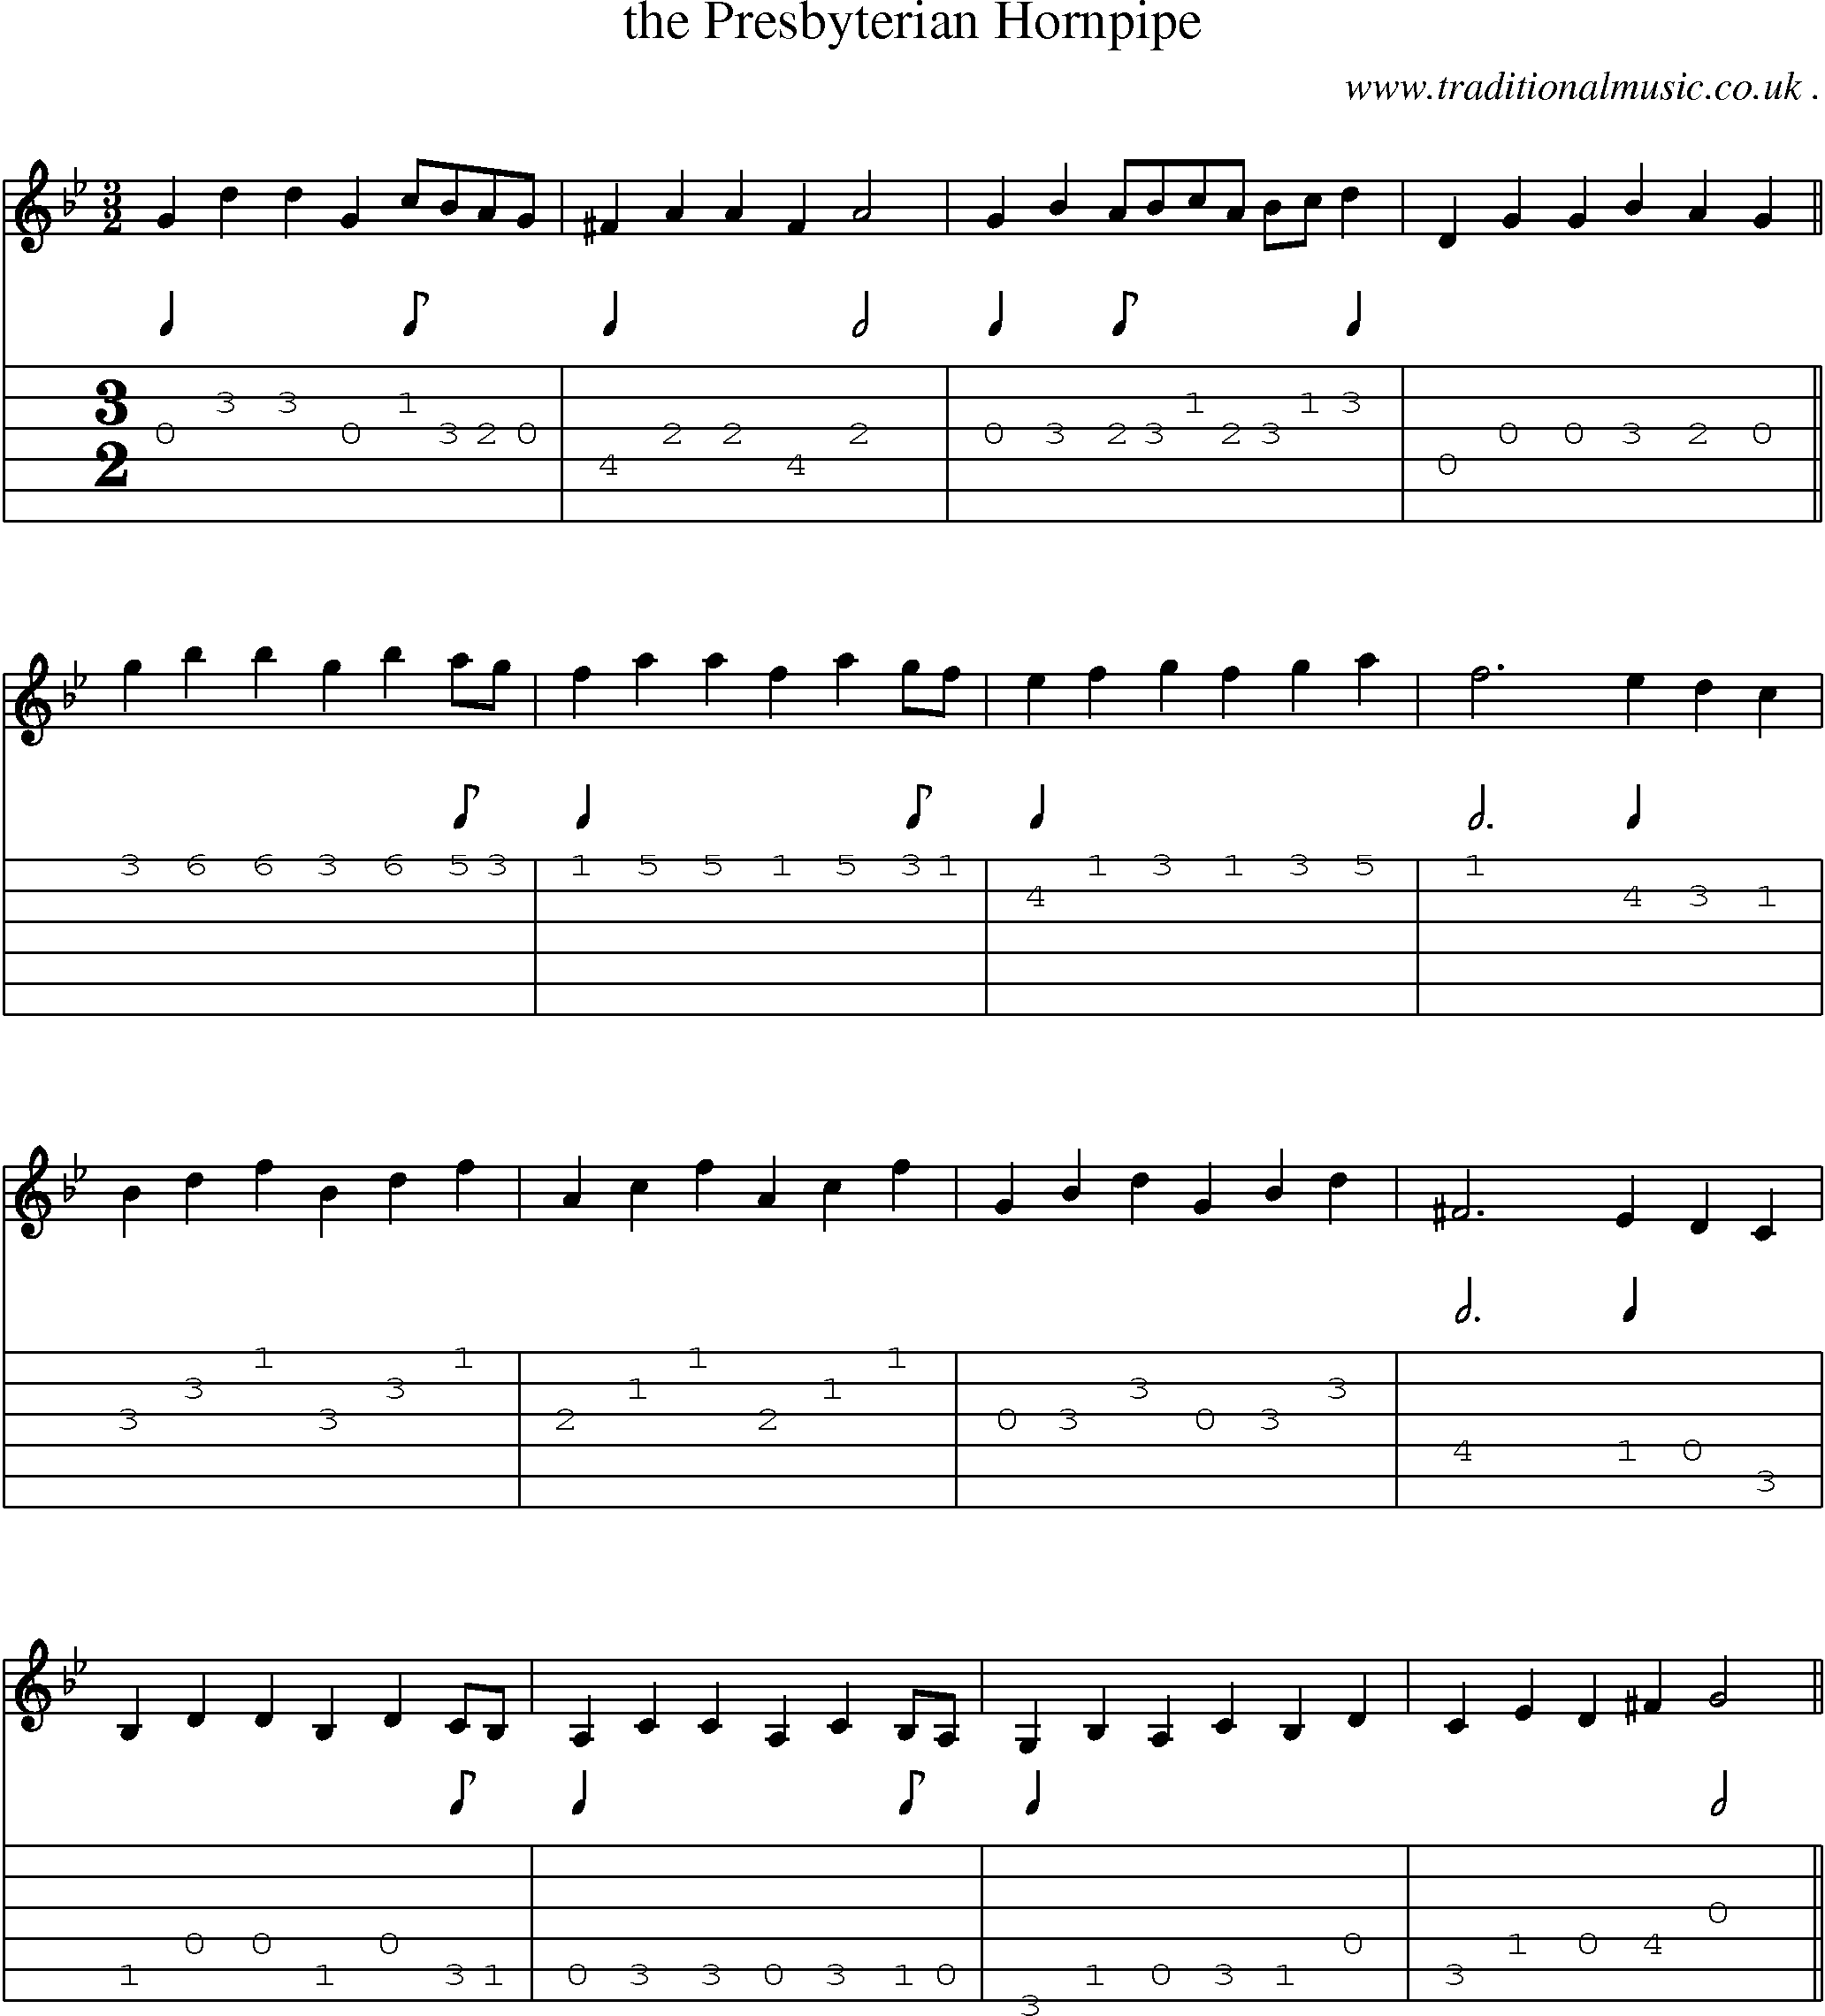 Sheet-Music and Guitar Tabs for The Presbyterian Hornpipe